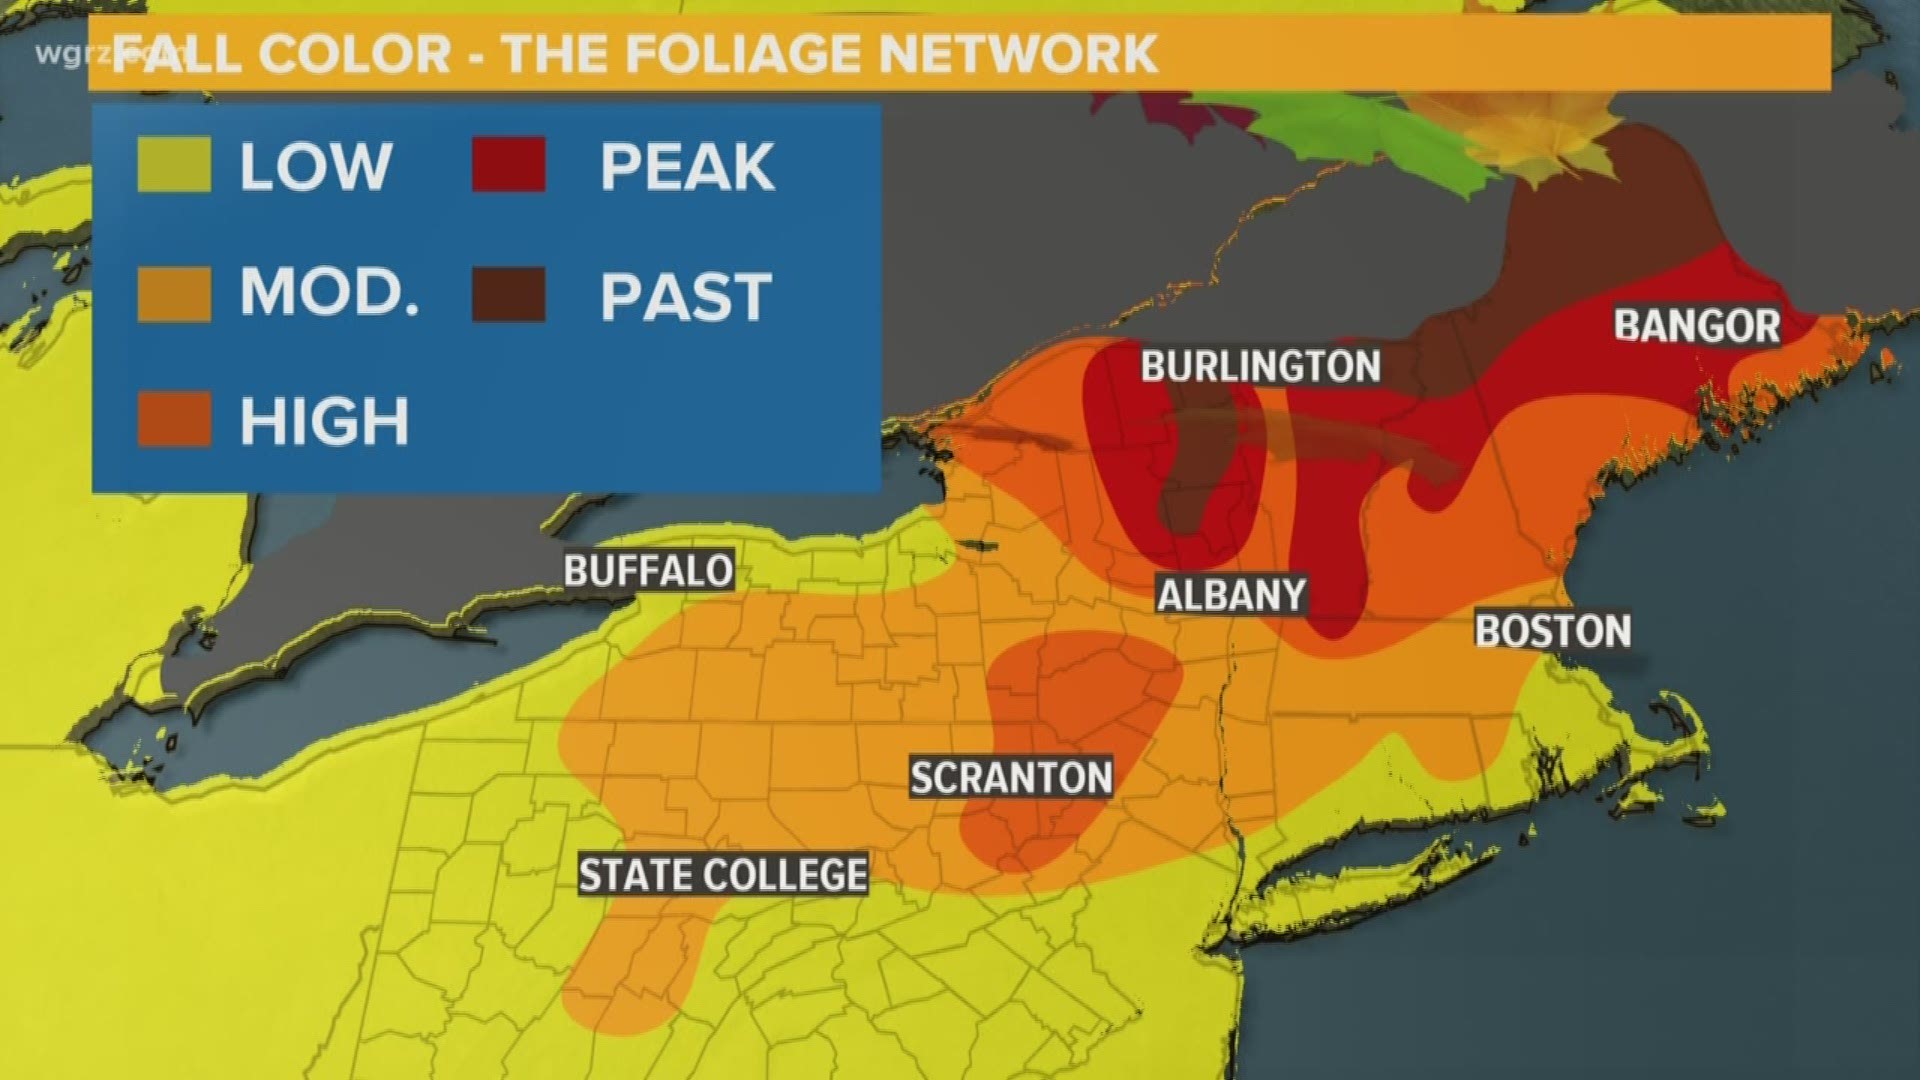 Patrick Hammer explains why the Fall colors this year have not been great.